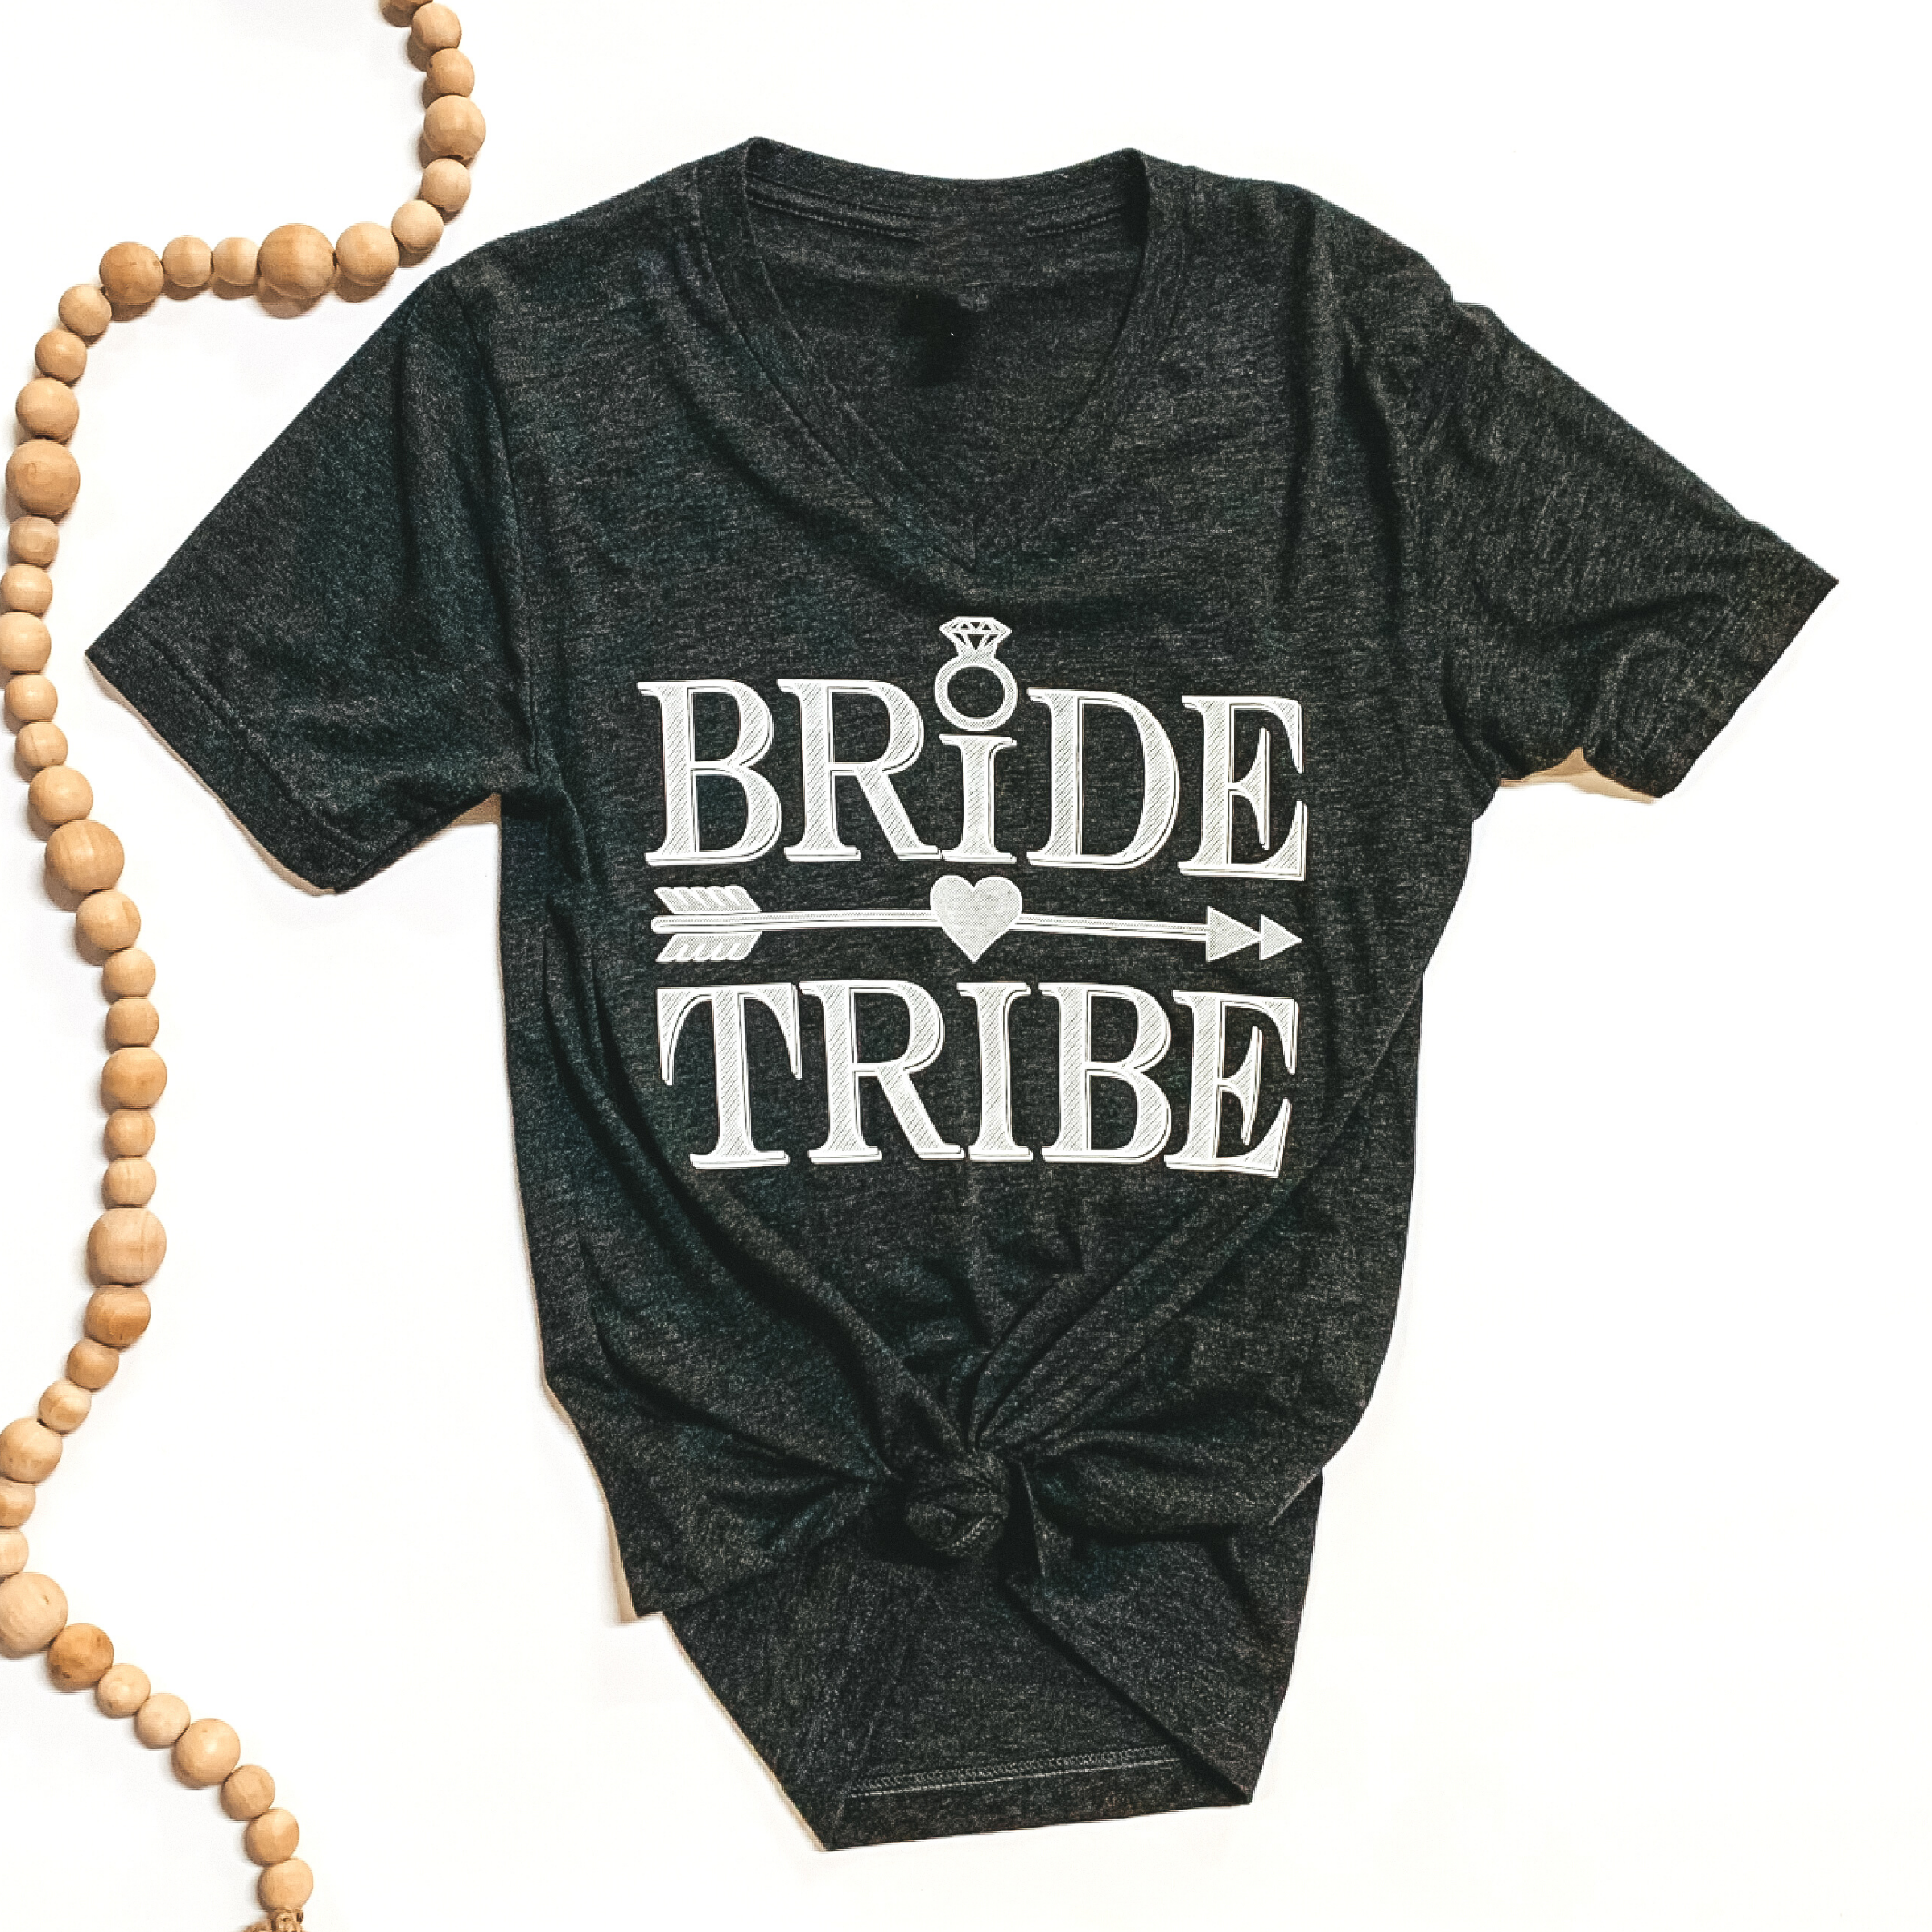 Last Chance Size Small | Bride Tribe Tee in Black